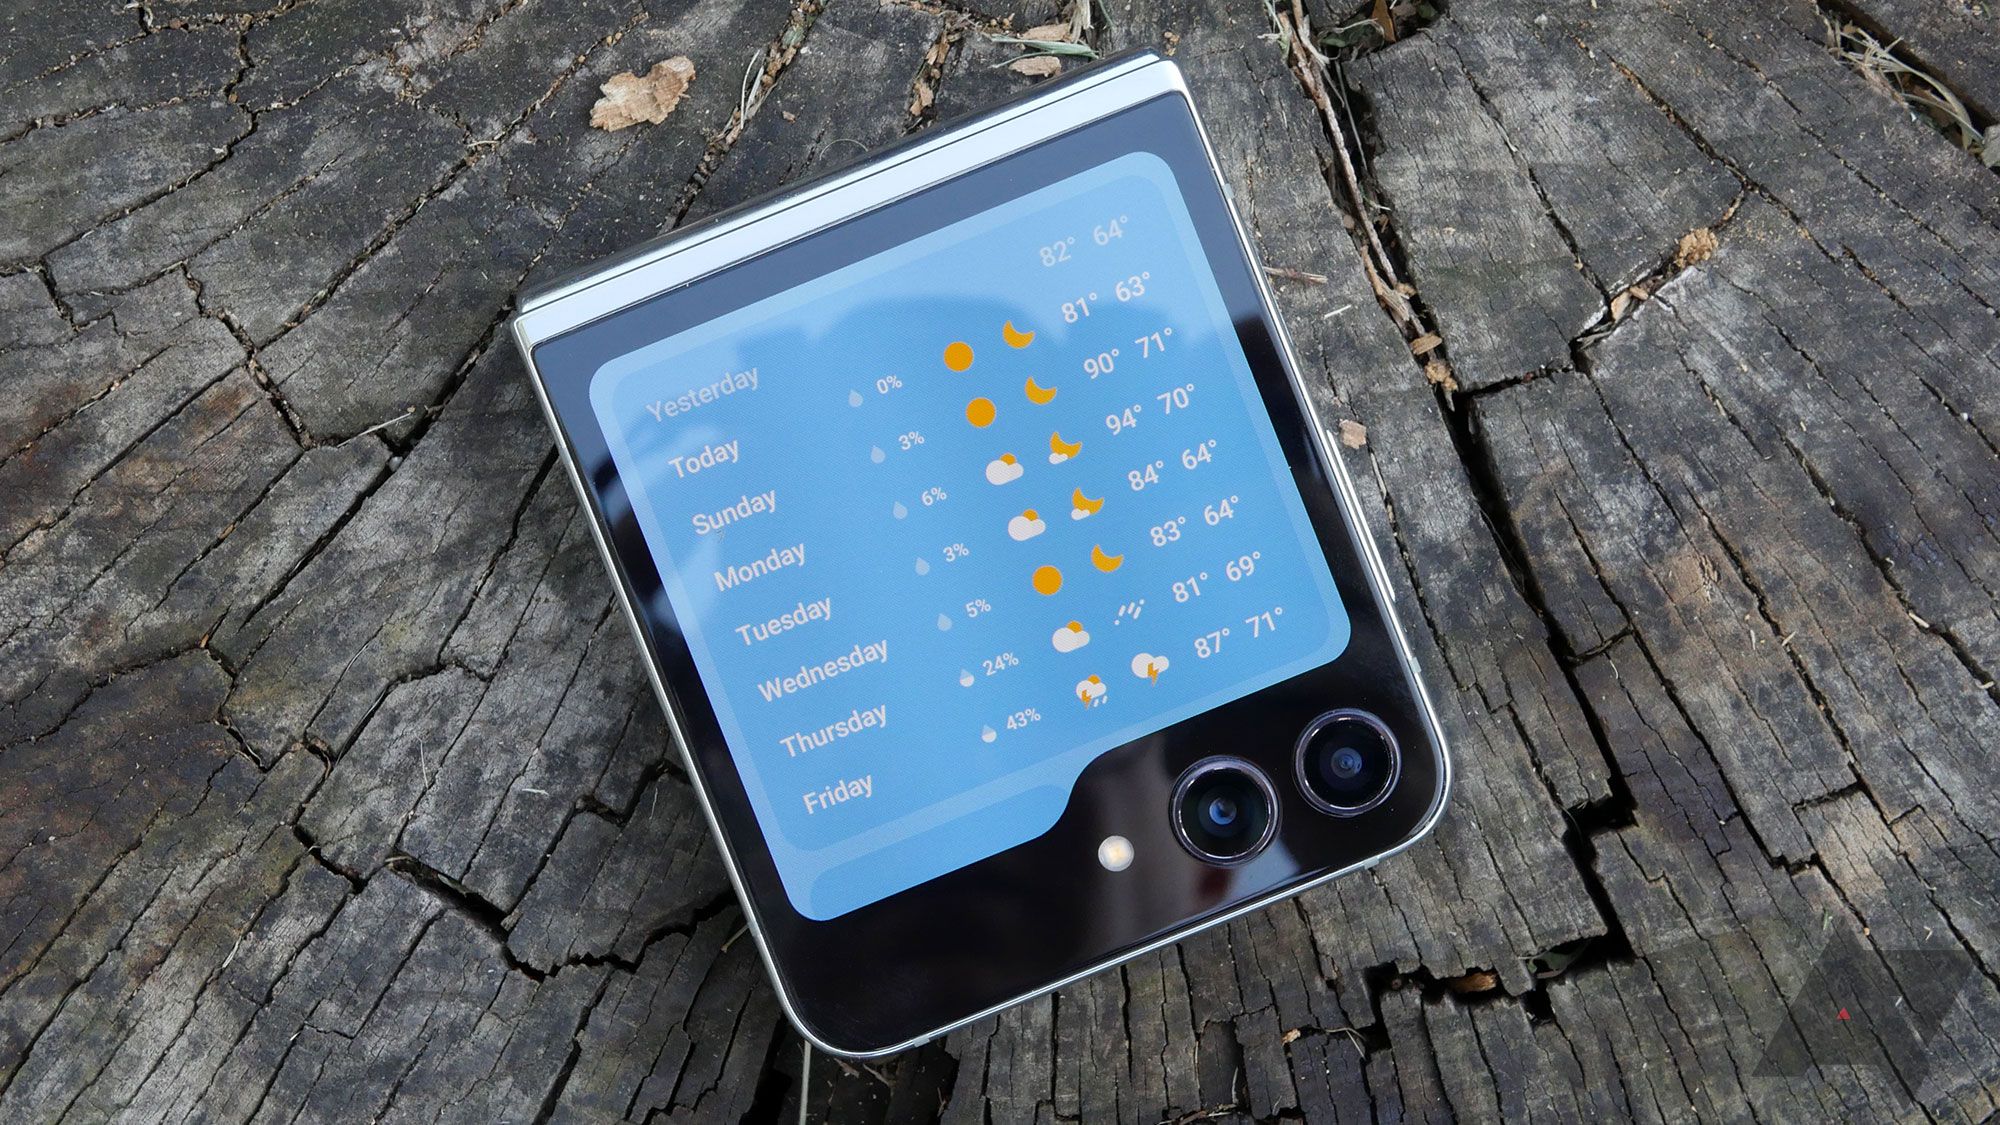 Samsung's Galaxy Z Flip 5 laying closed on tree trunk wood with the weather widget showing.